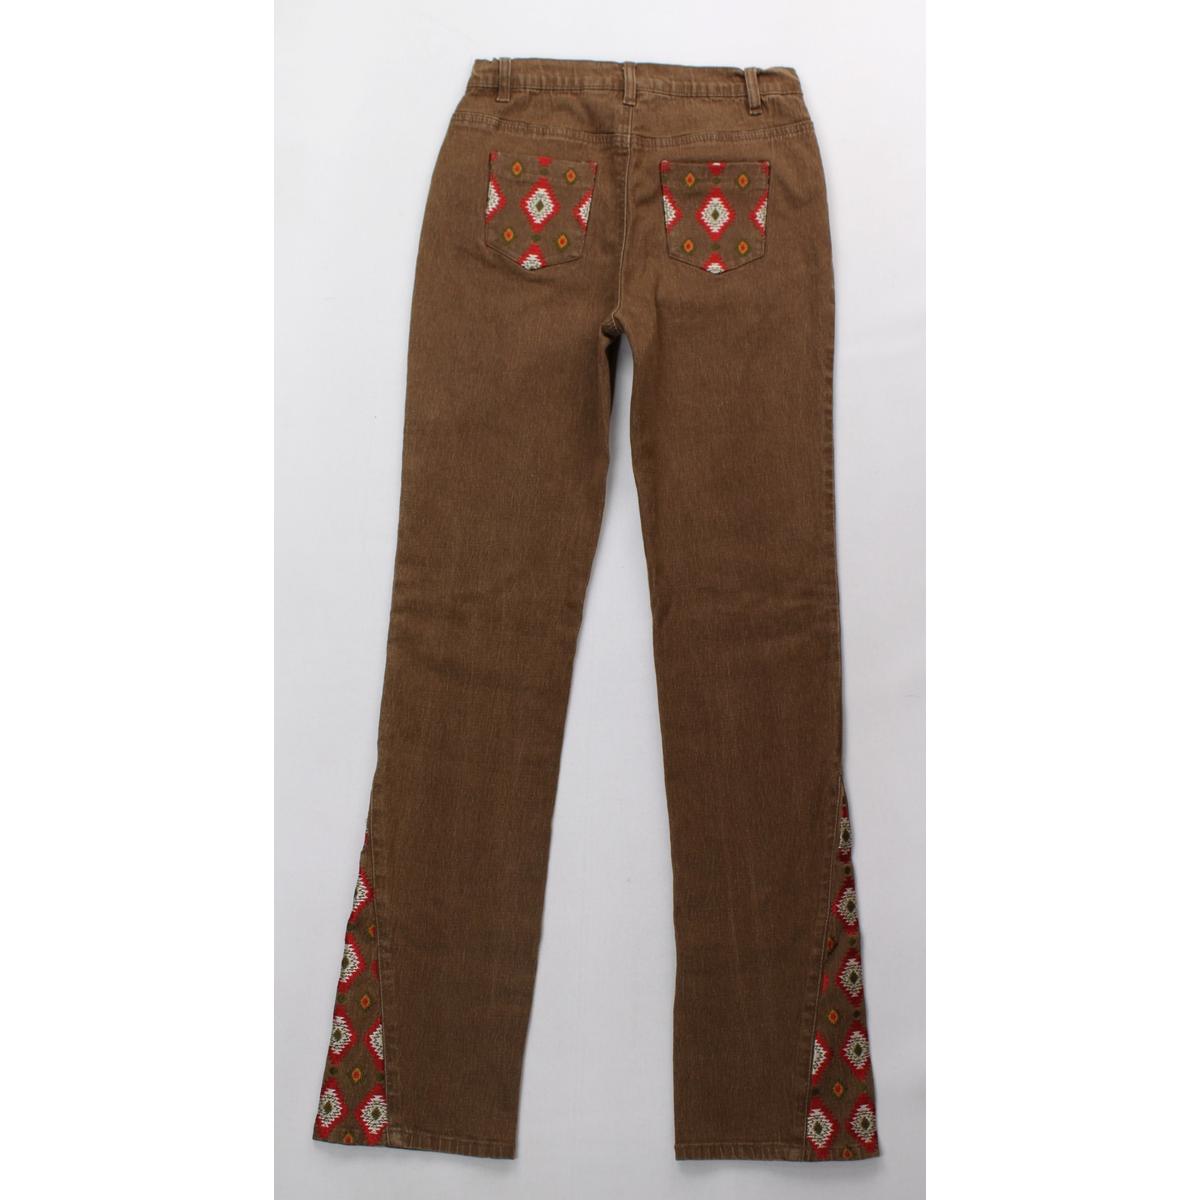 Womens brown bootcut jeans